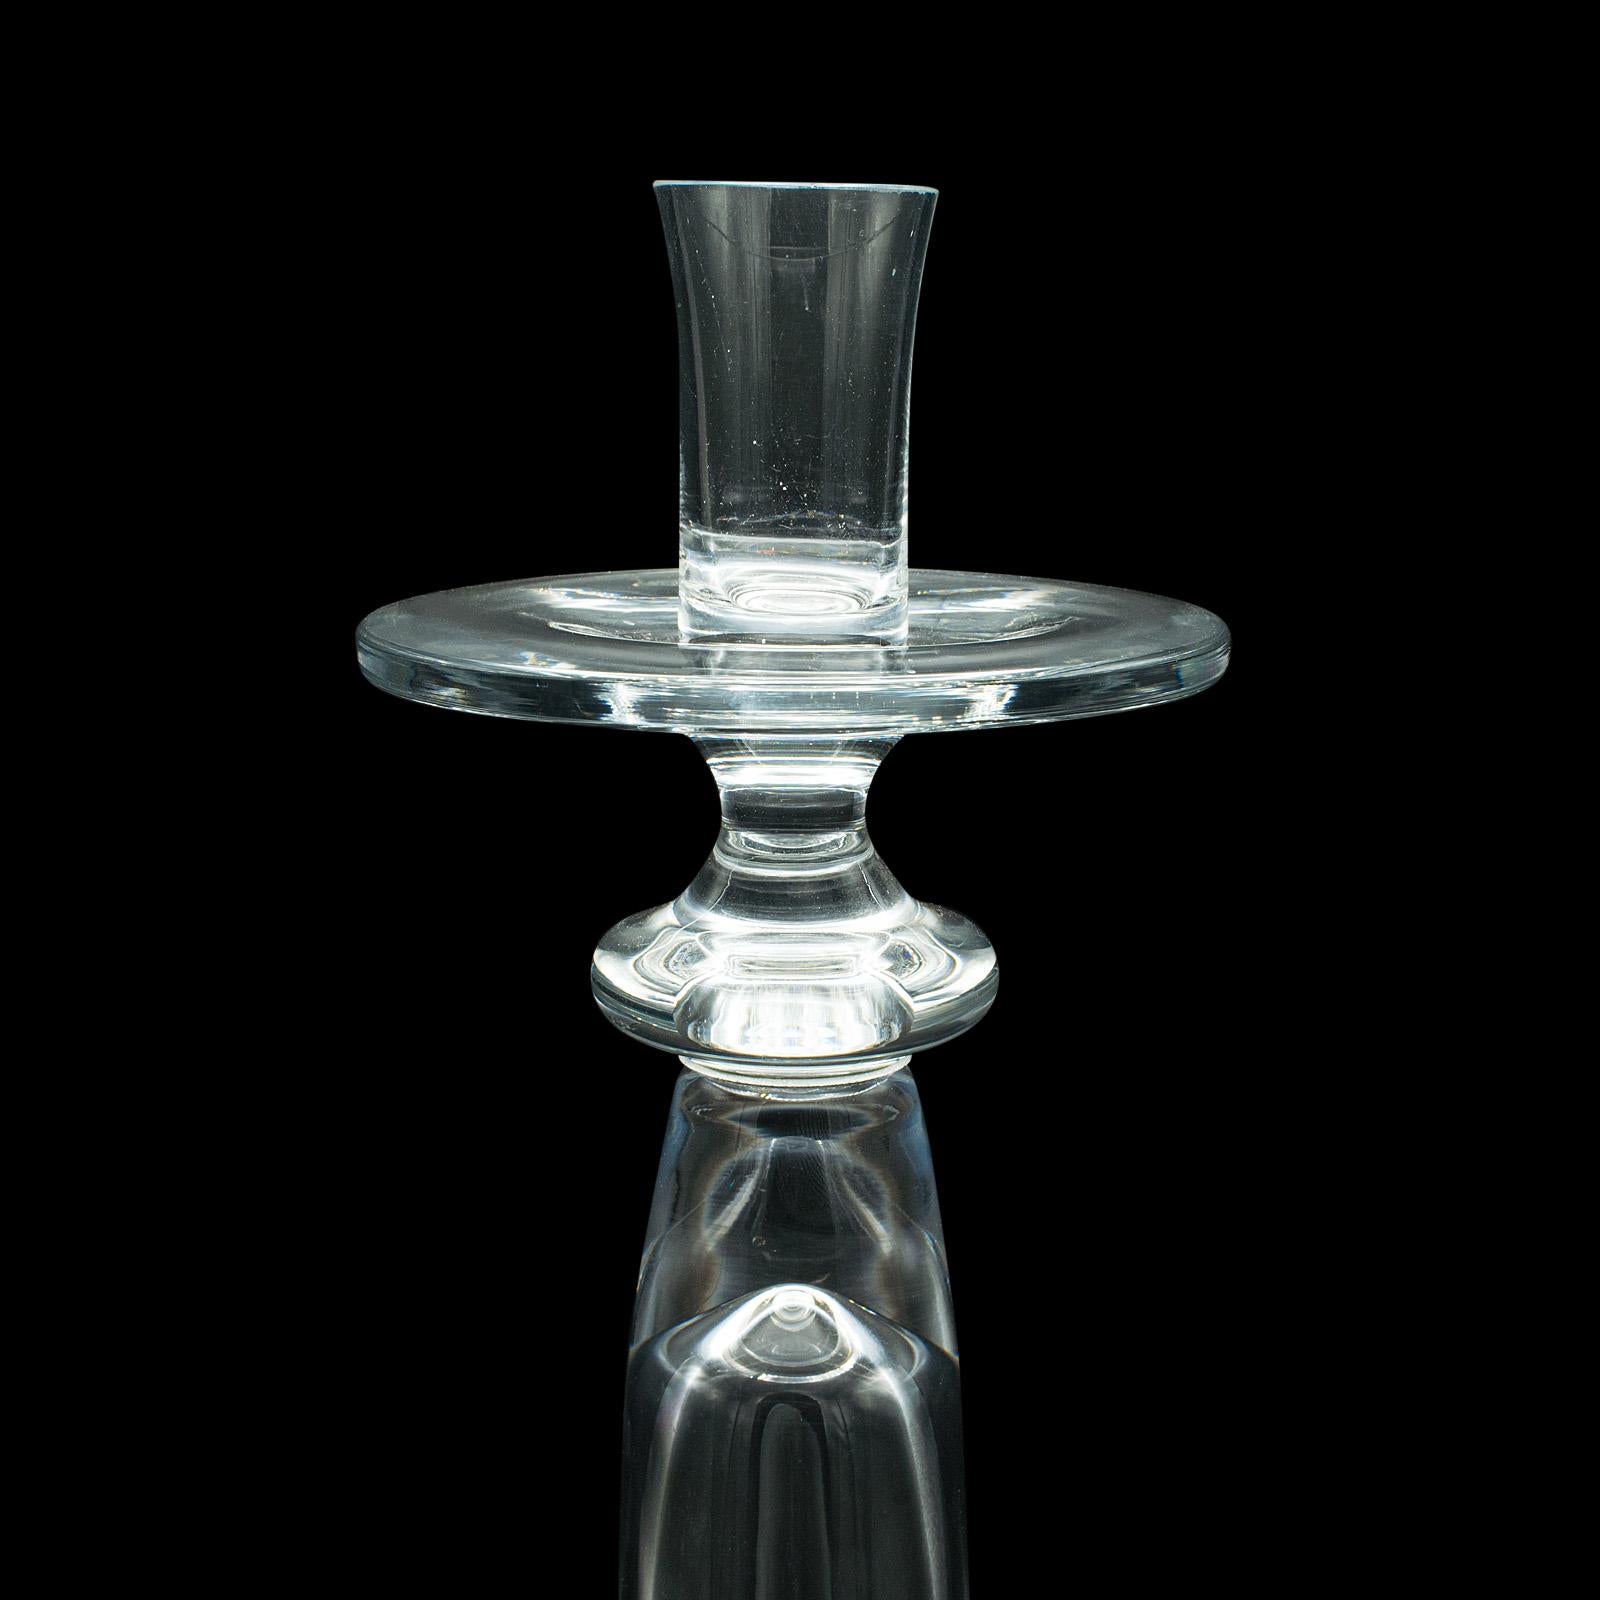 Vintage Centrepiece Candlestick, Italian Glass, Candle Nozzle, Late 20th Century For Sale 3